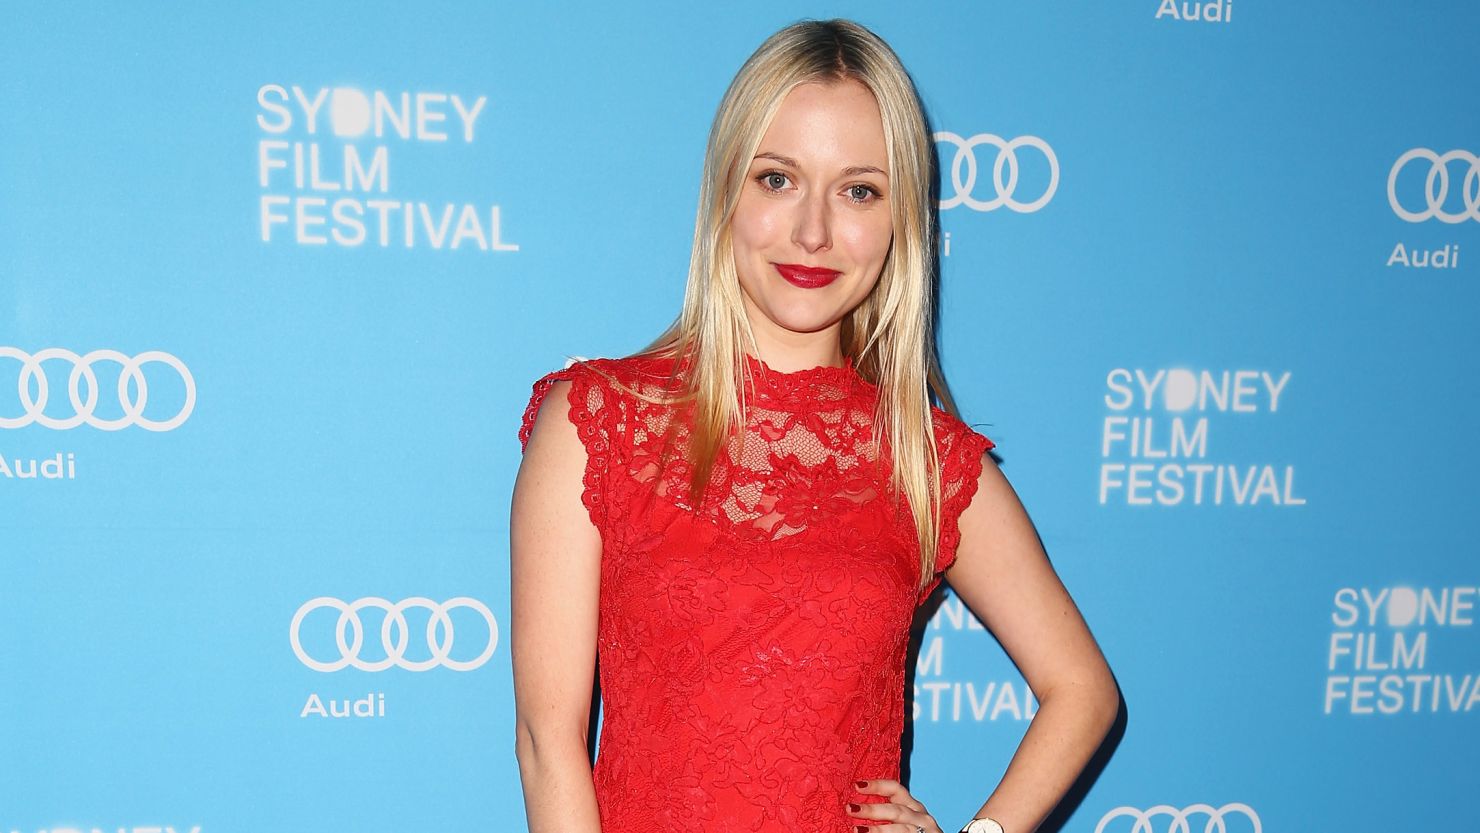 Georgina Haig has nabbed the role of "Frozen's" Queen Elsa on ABC's "Once Upon a Time."